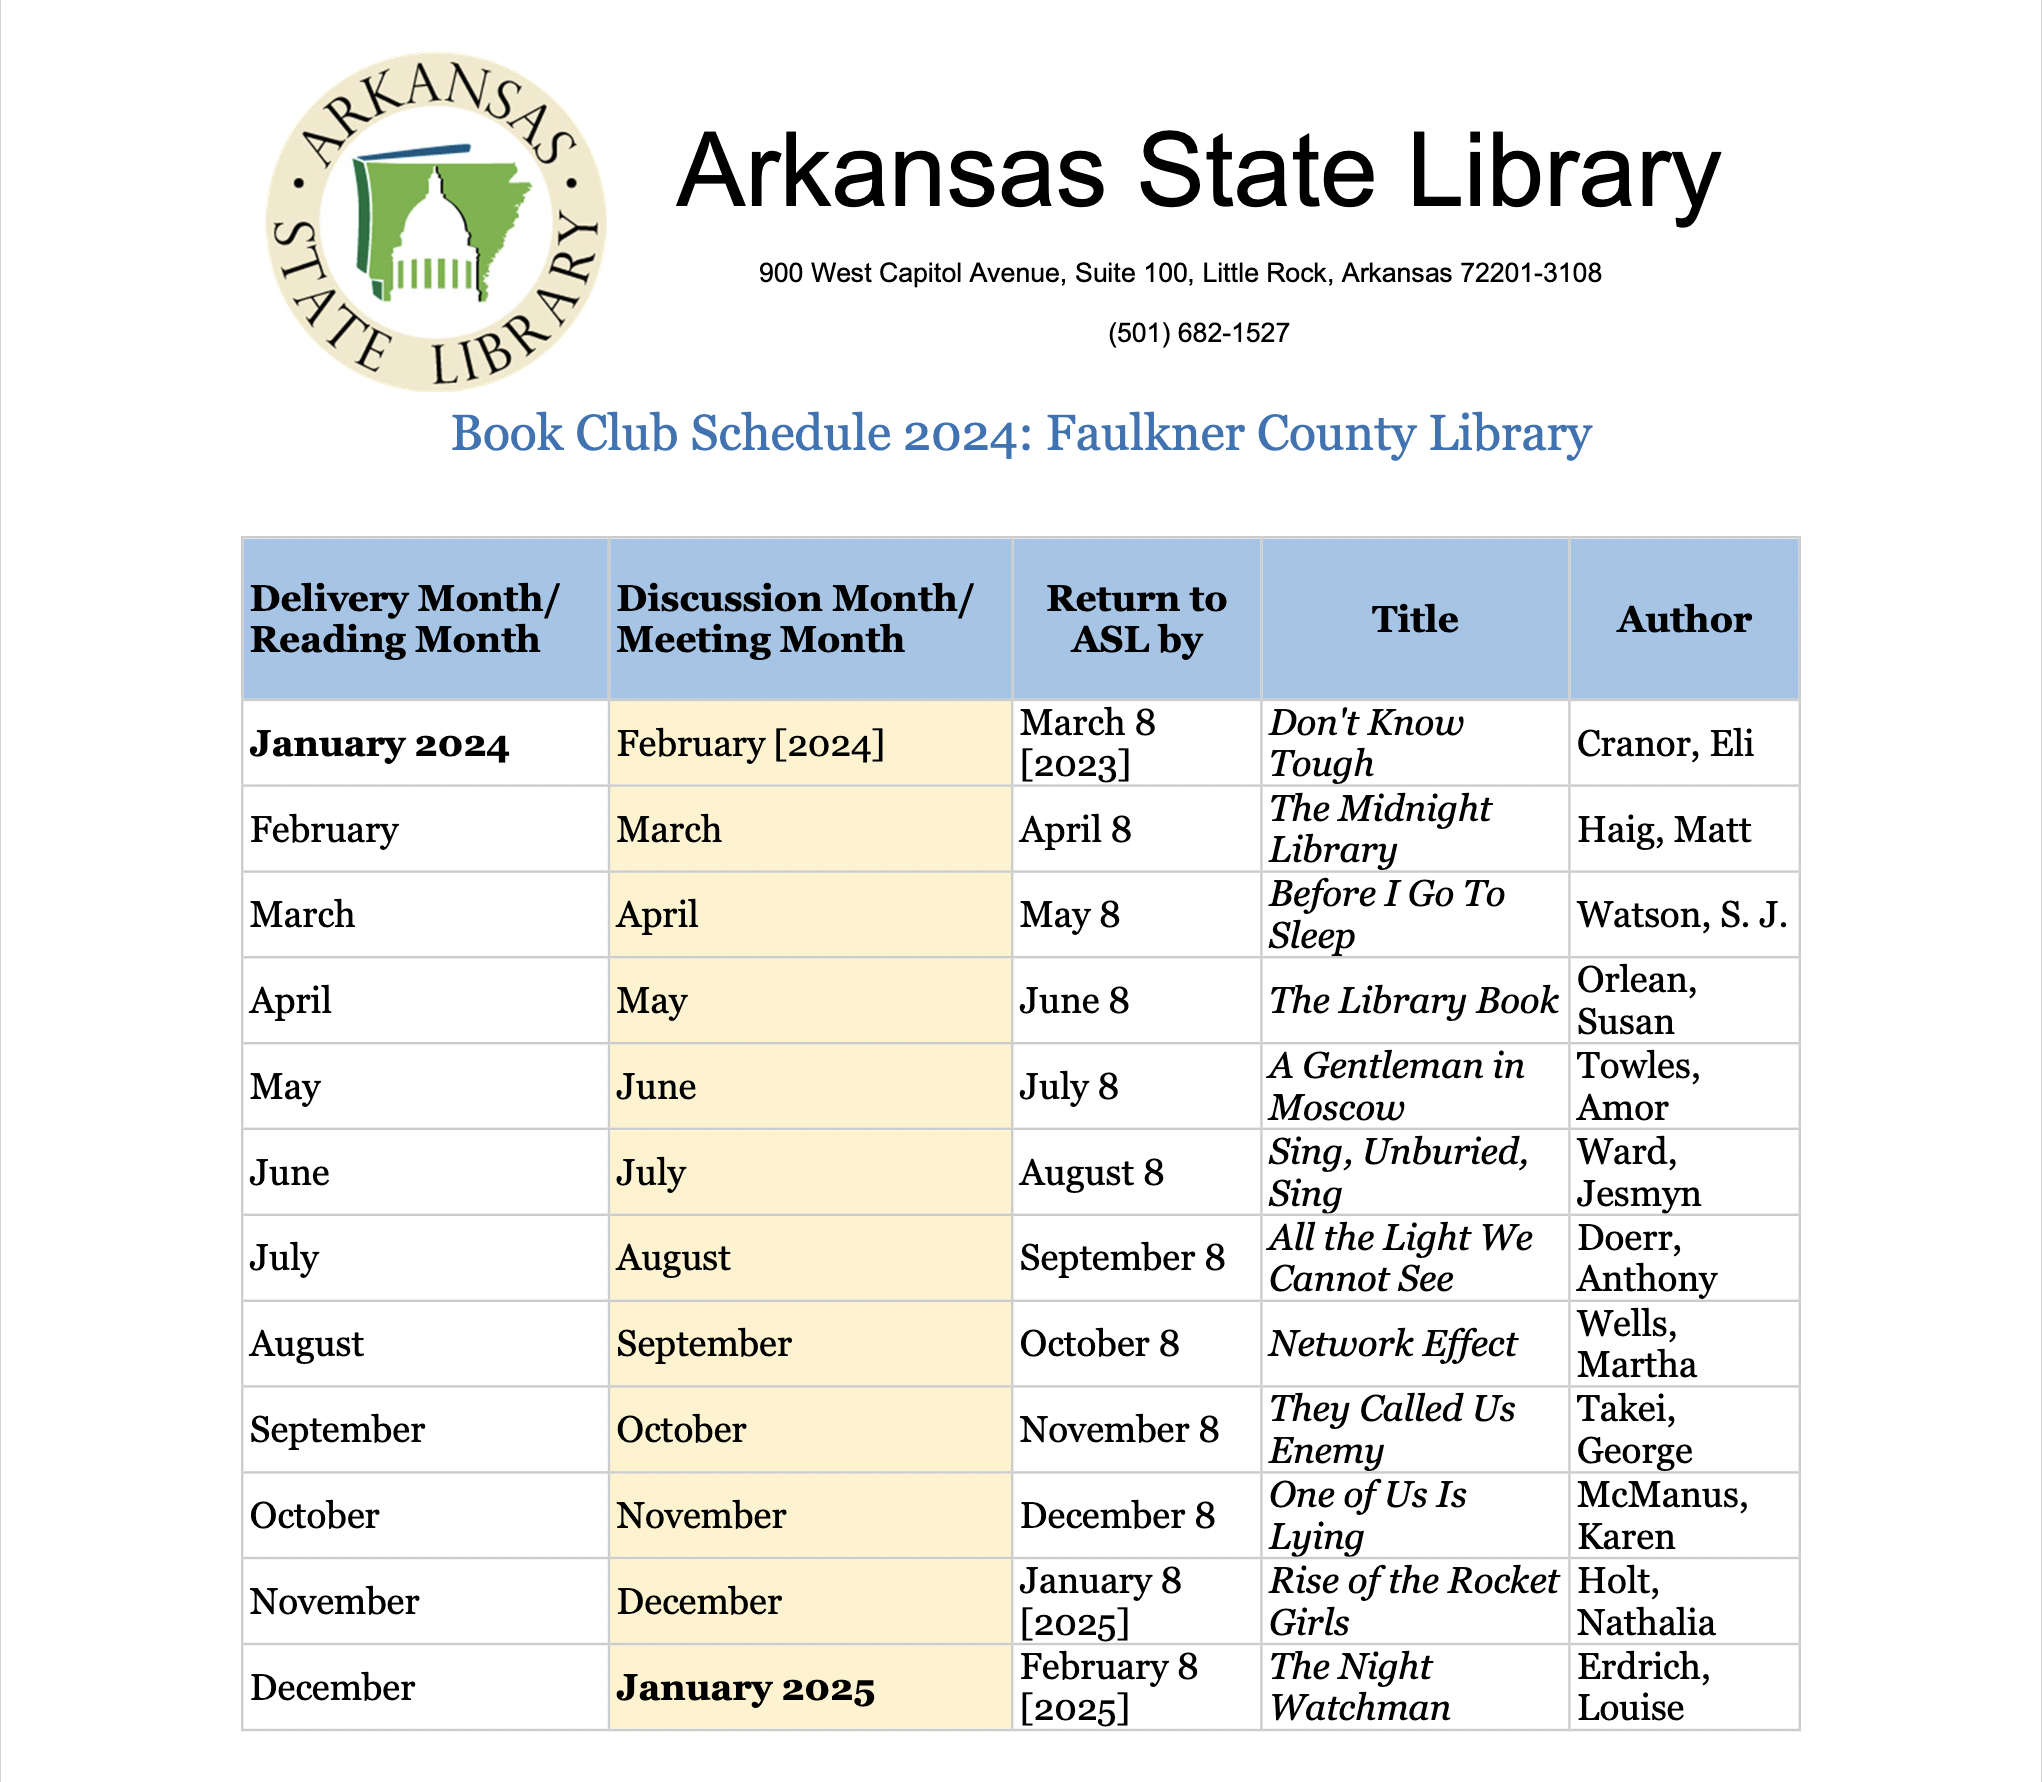 Arkansas State Library Book Club List for 2nd Thursday Book Club at Faulkner County Library